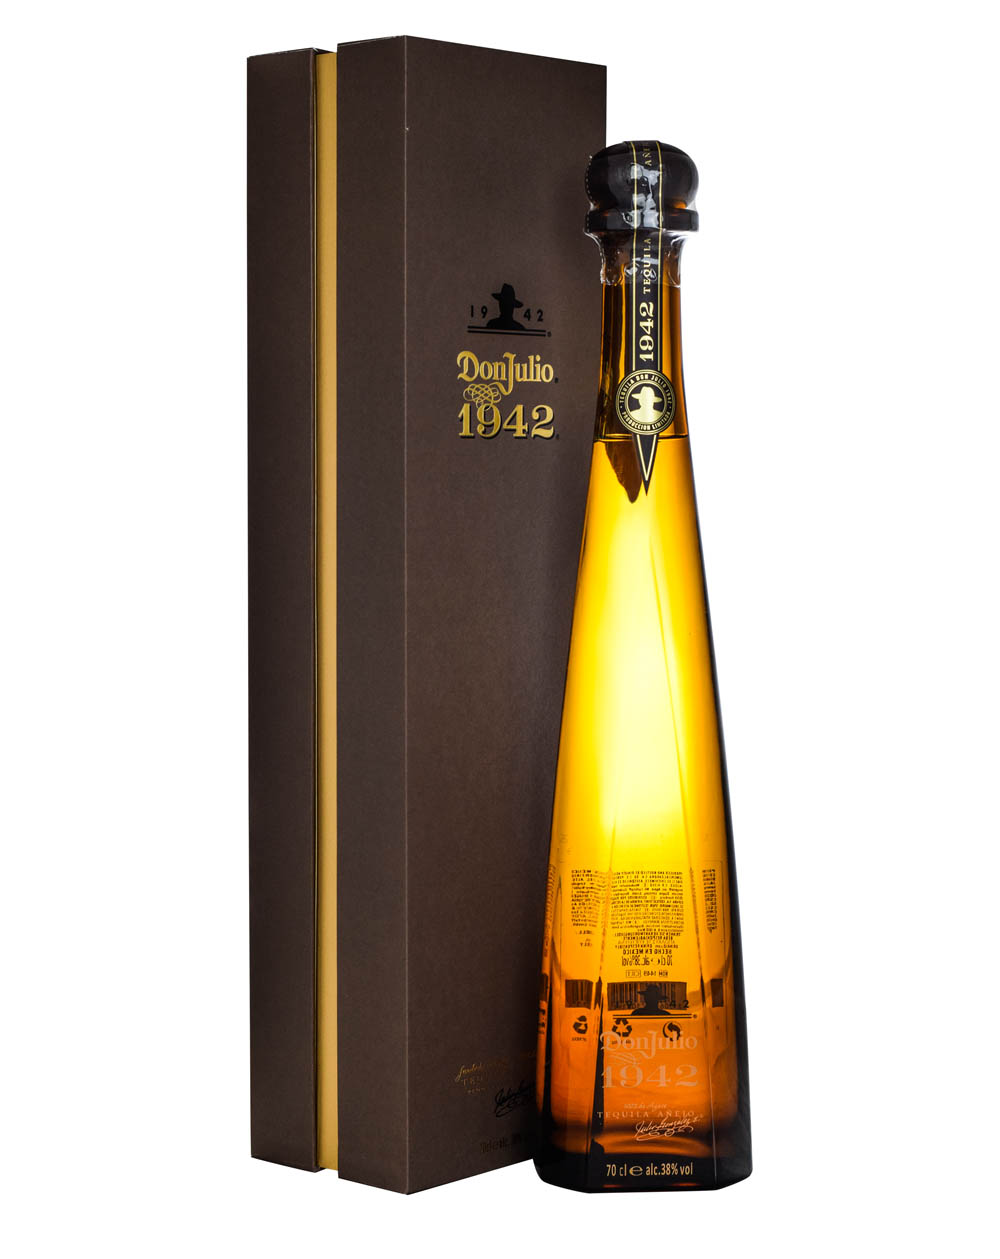 Don Julio 1942 Tequila Box Musthave Malts MHM